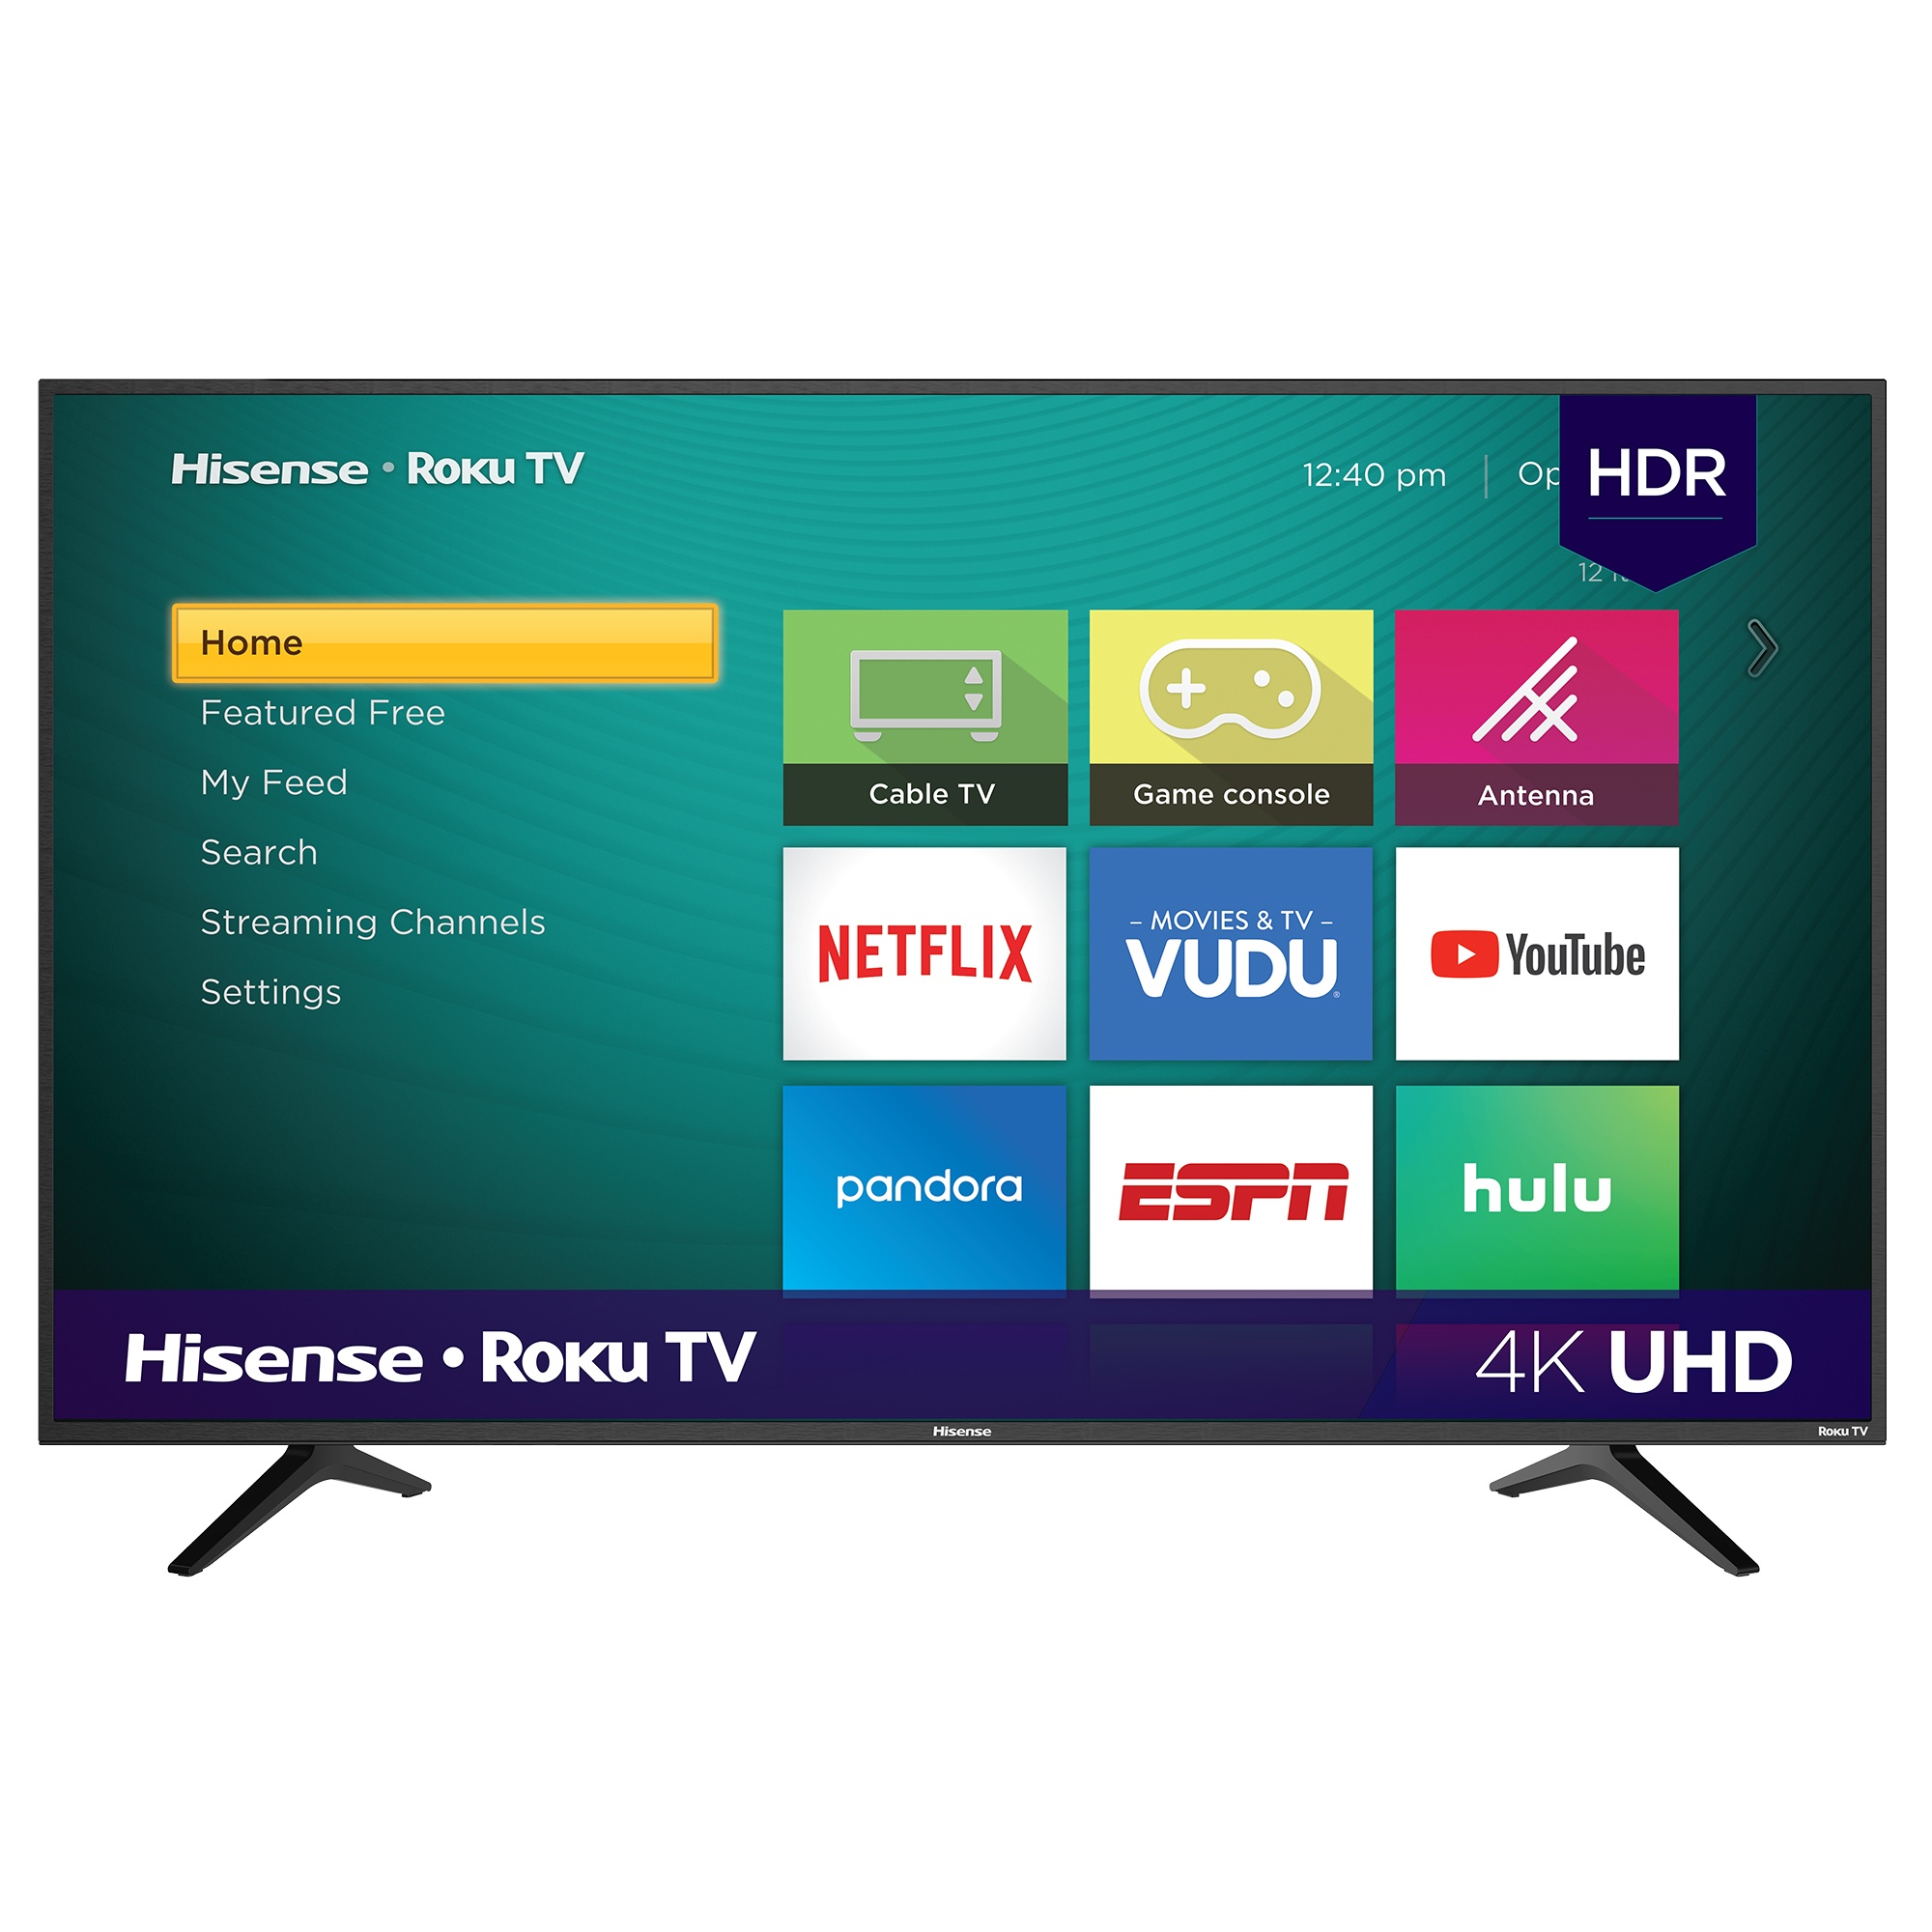 Enter to Win a 58″ Hisense TV in Roku’s Father’s Day Giveaway